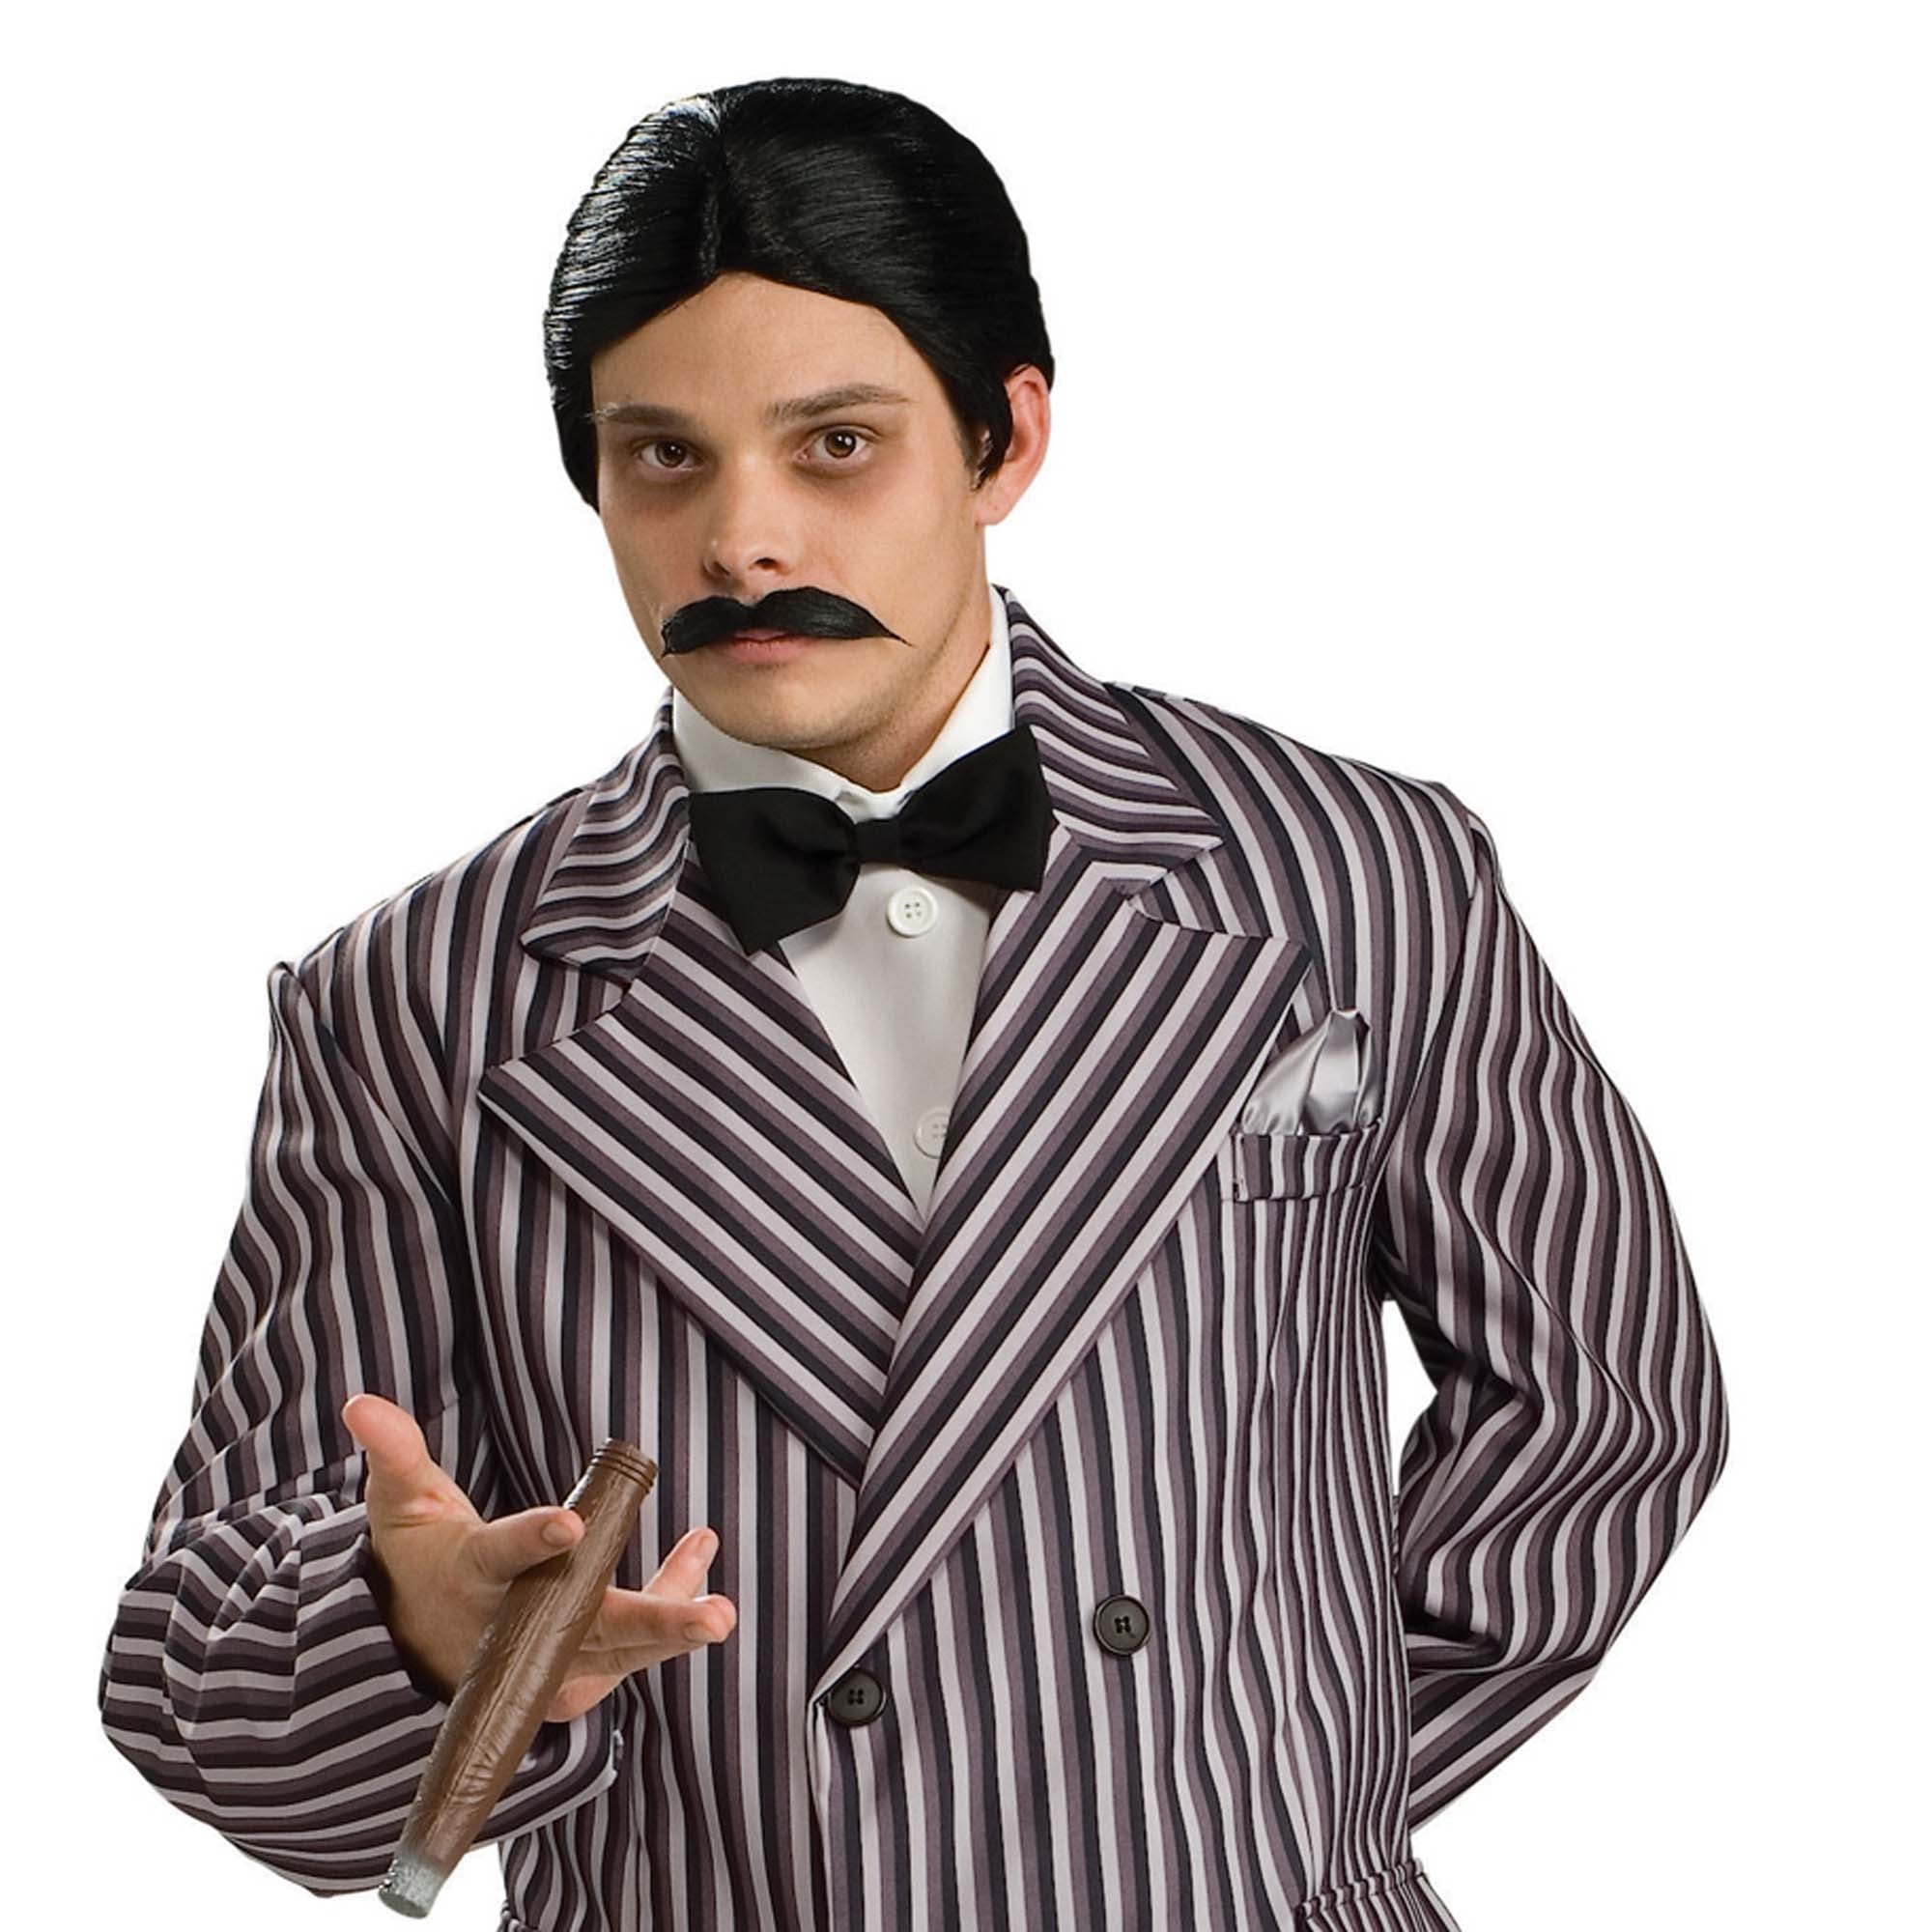 Gomez Addams Black Wig and Mustache for Adults